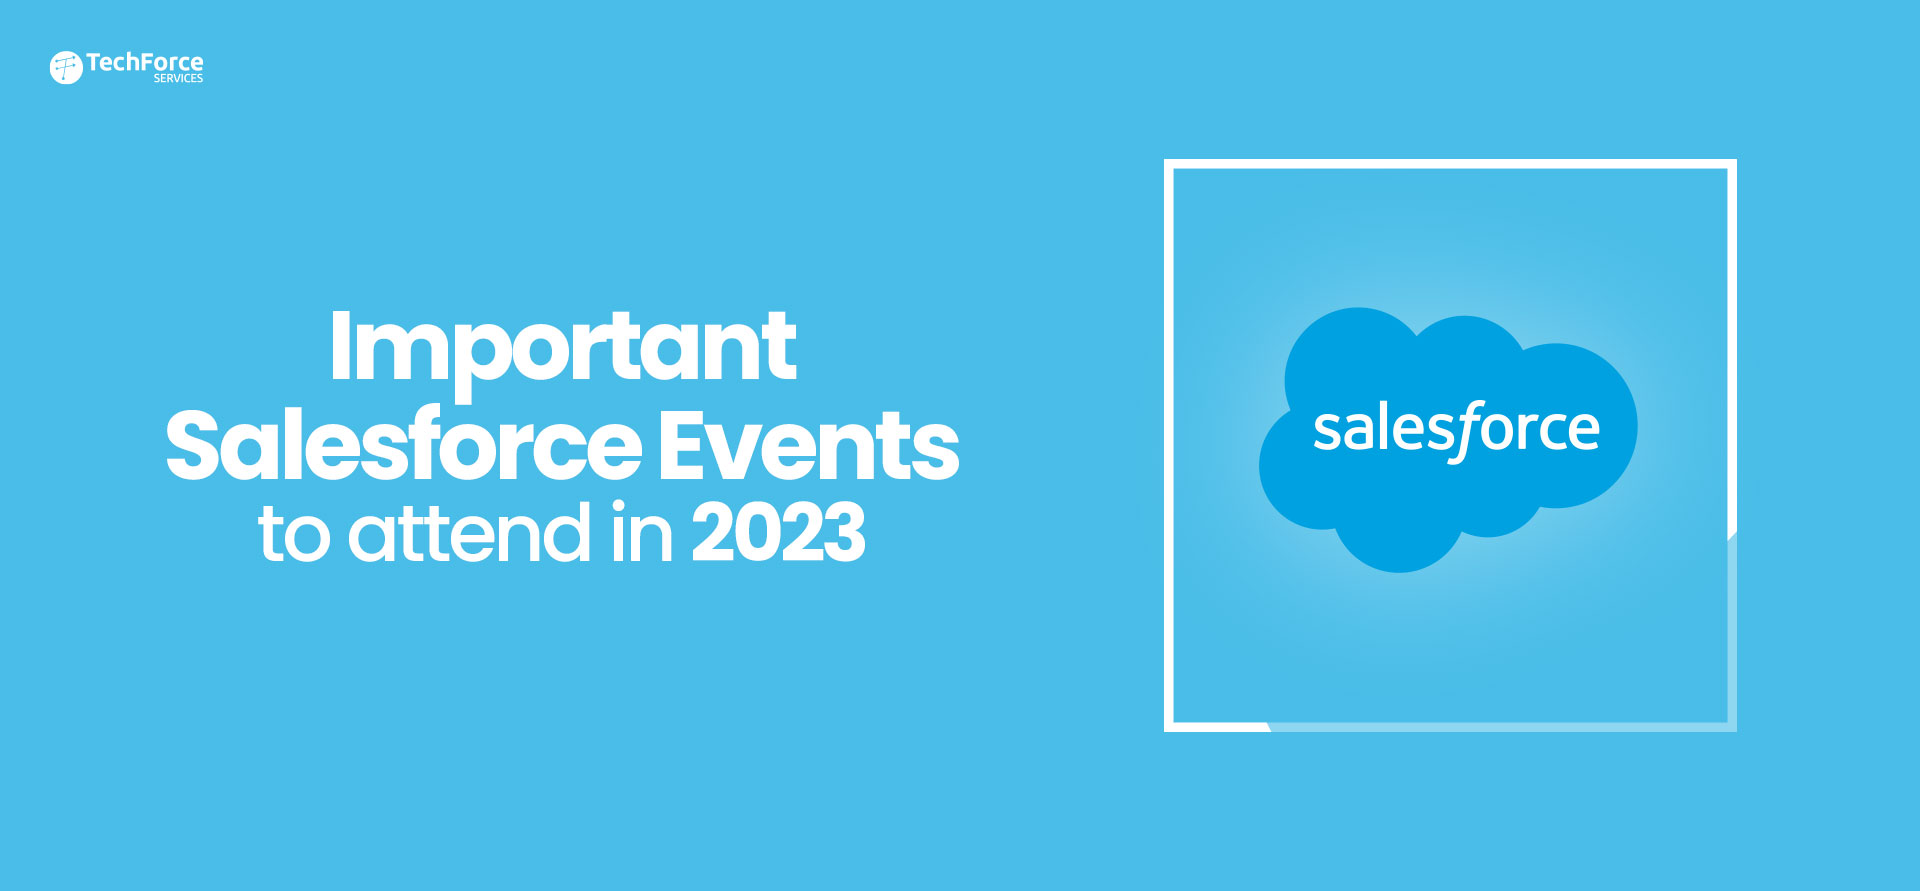 Best-Salesforce-Events-to-Attend-in-2023 (1)